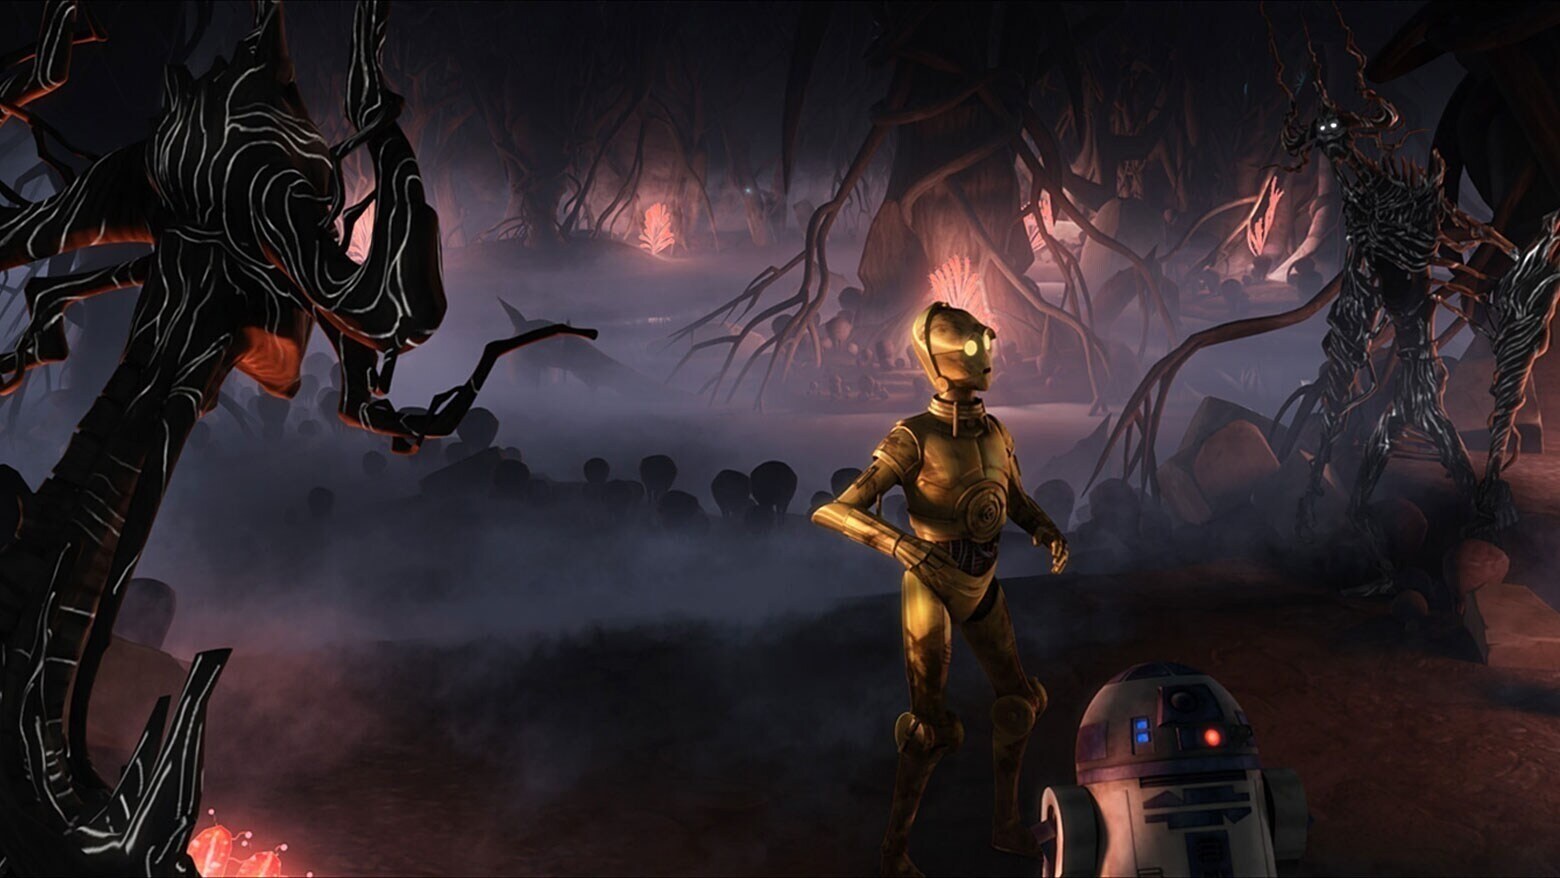 R2-D2 and C-3PO on the planet Aleen in The Clone Wars